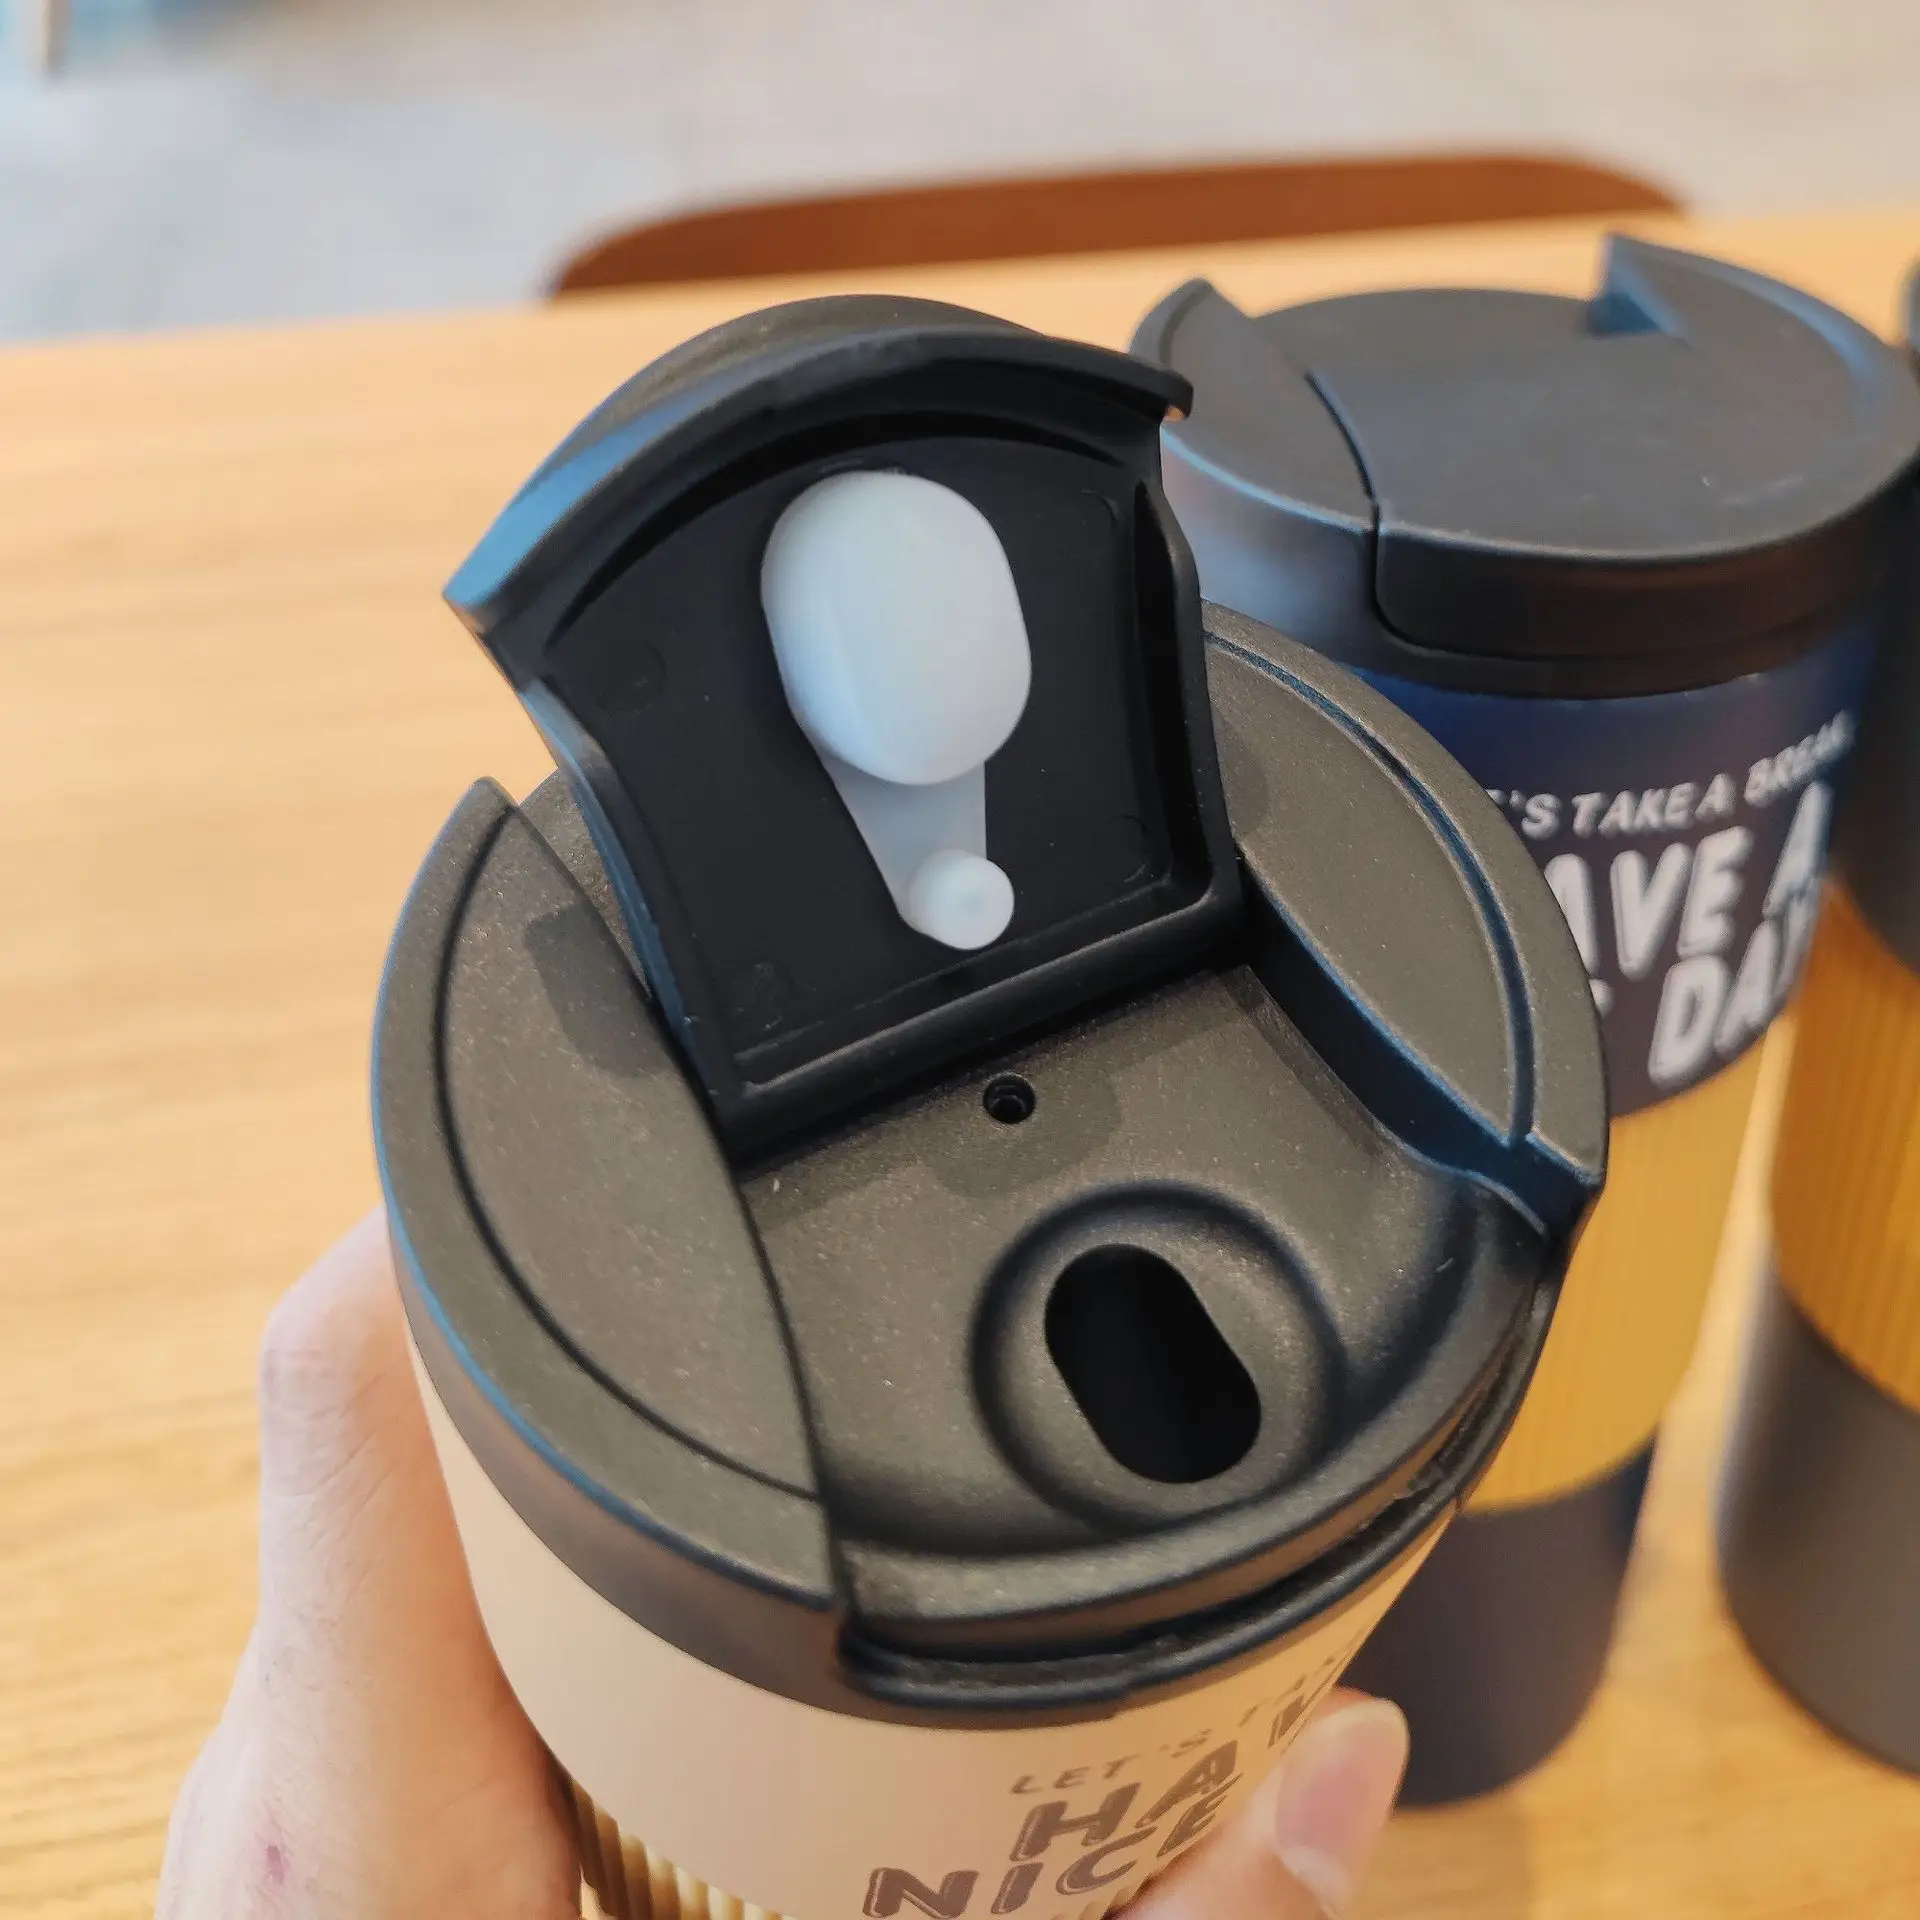 https://ae01.alicdn.com/kf/Sccef04a310264a3a8d37098d23820877P/Xiaomi-Thermal-Cup-For-Coffee-Mountain-Travel-Thermal-Cup-Sleek-Insulated-Cup-For-Coffee-316-Stainless.jpg